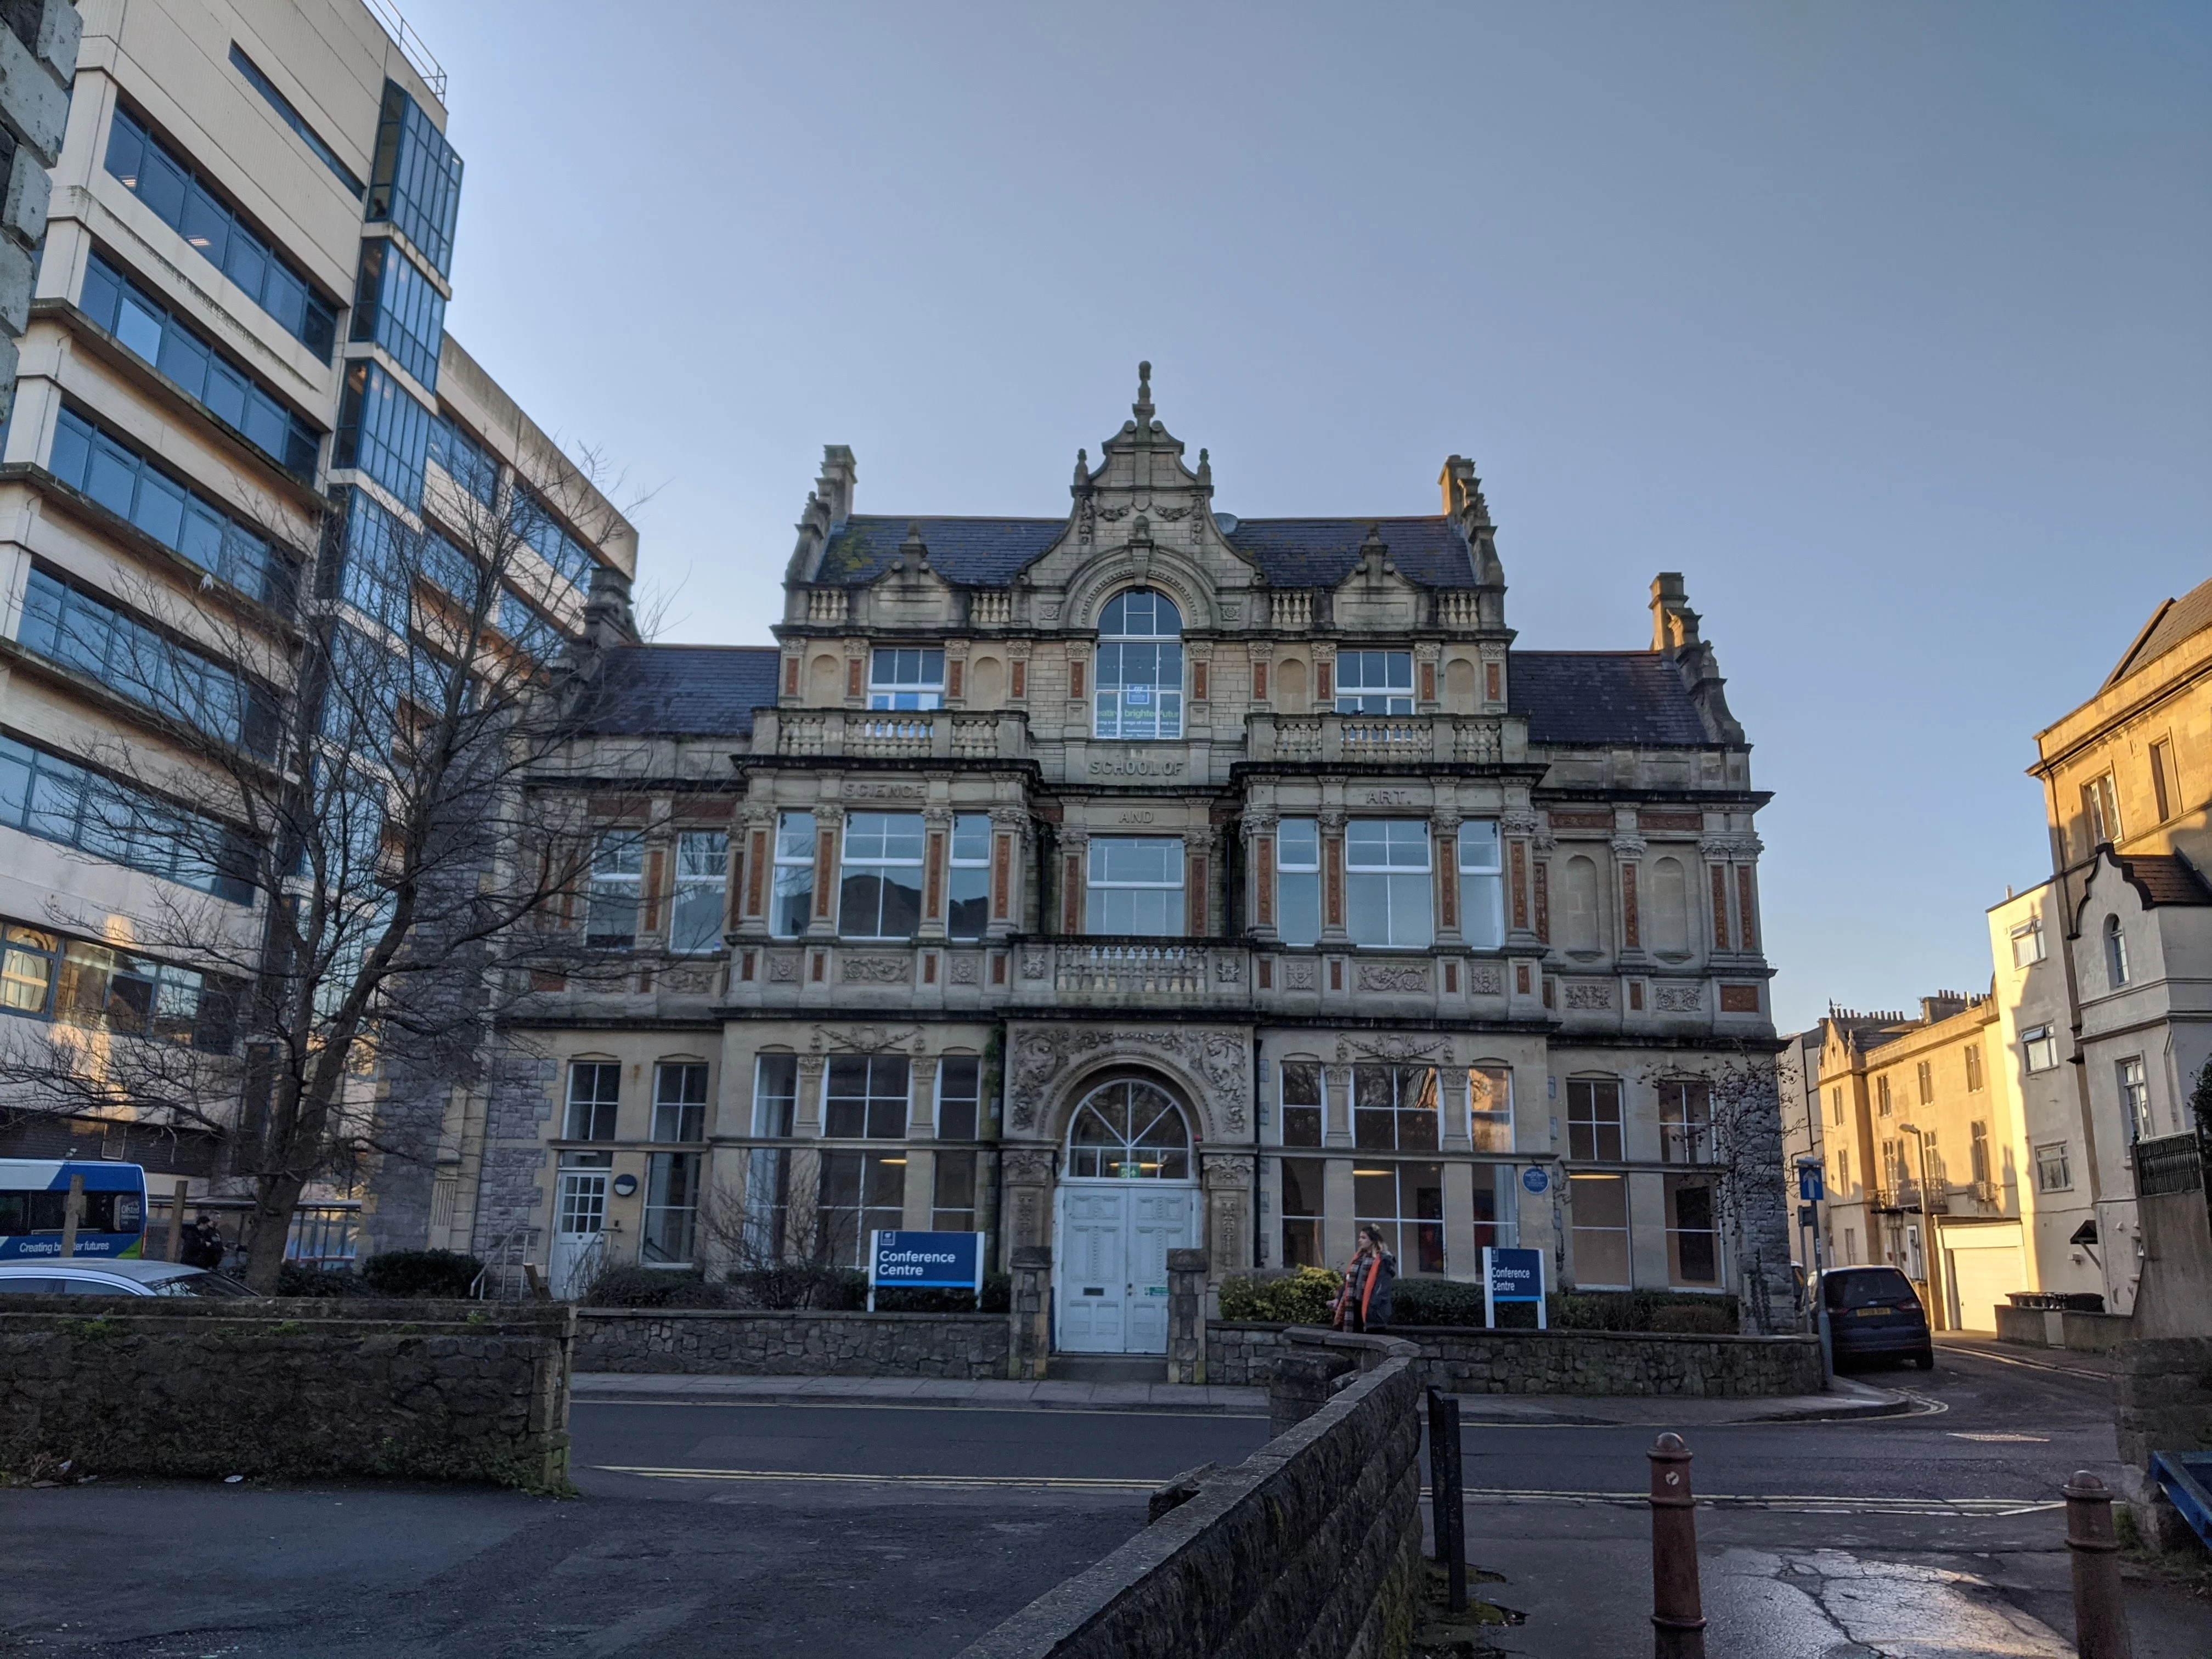 A photo of the Weston College Conference Centre on Lower Church Road in Weston-super-Mare.